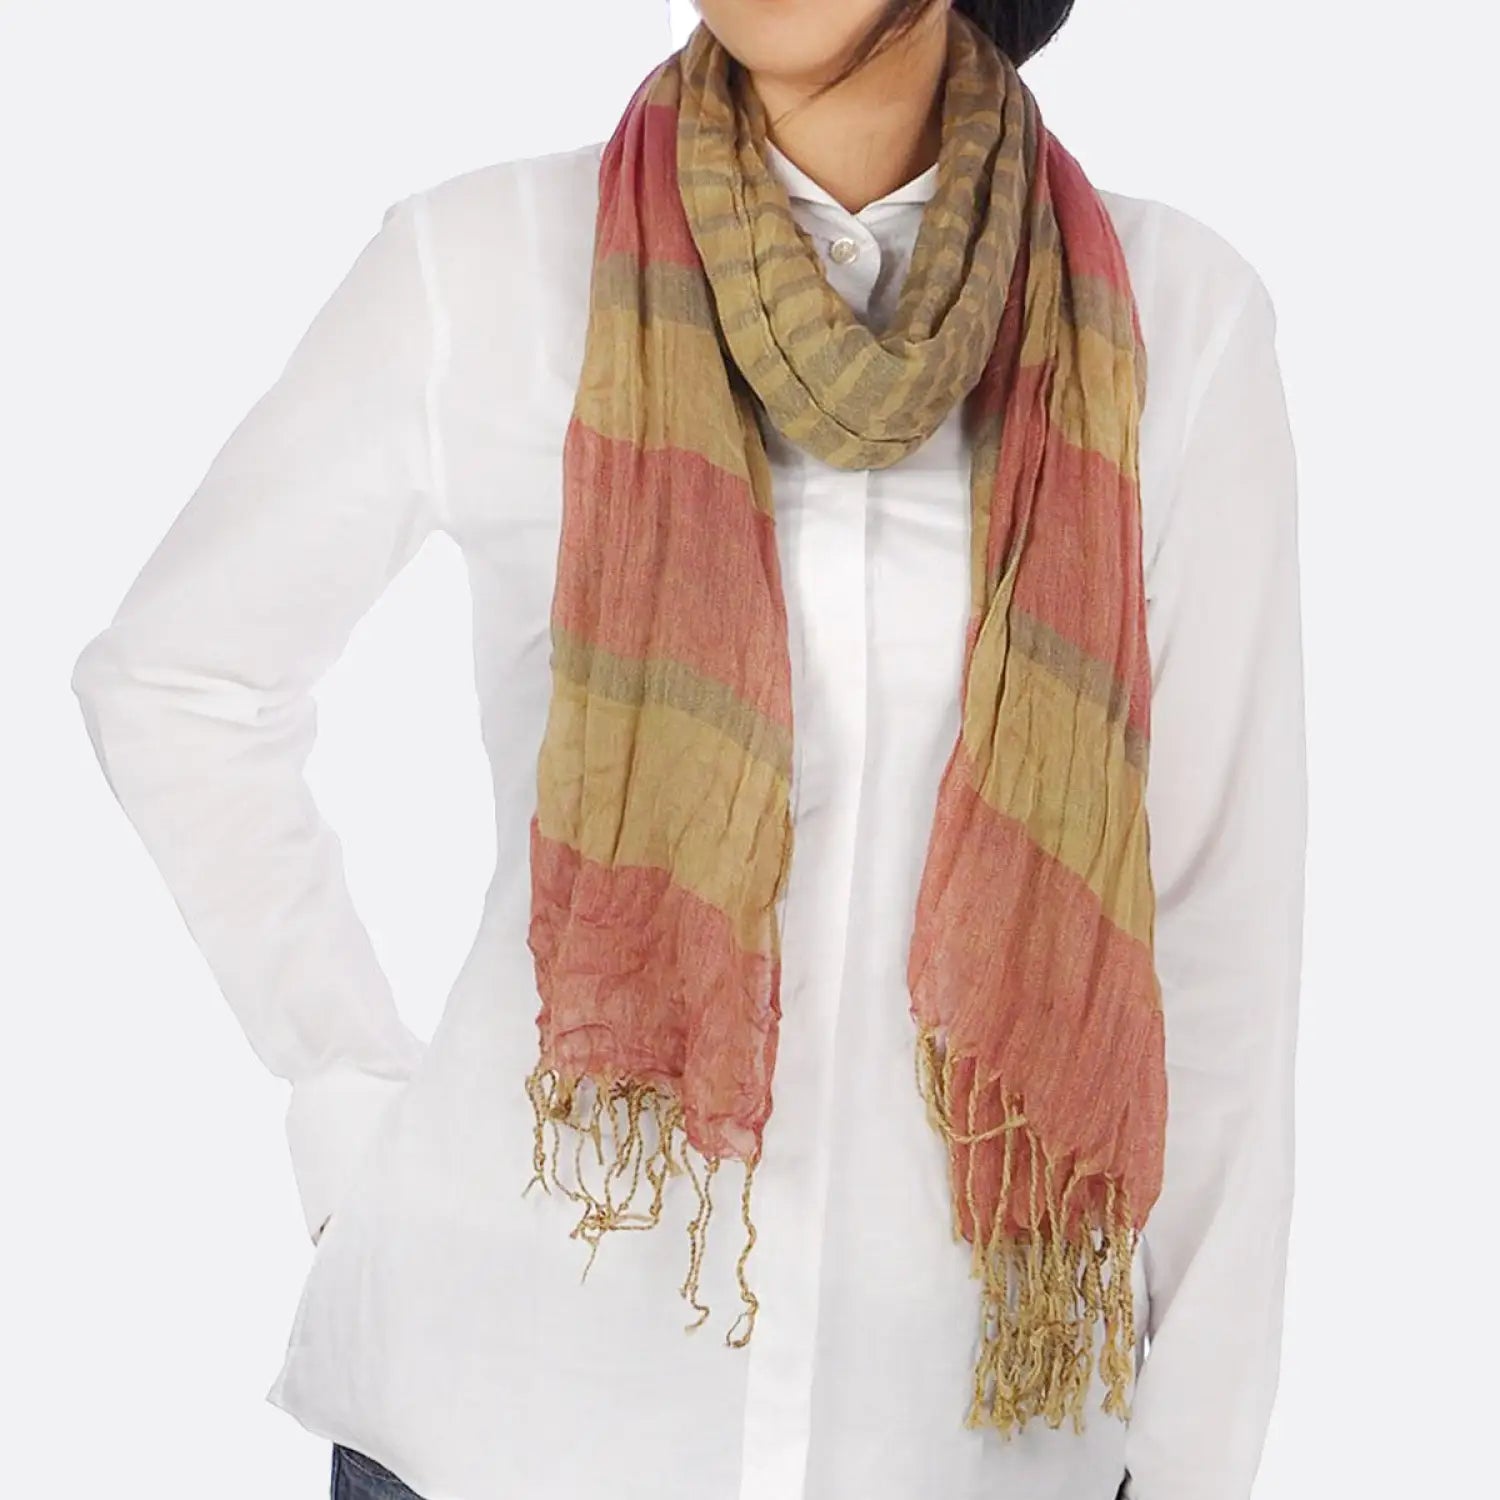 Bold striped crinkled scarf on woman